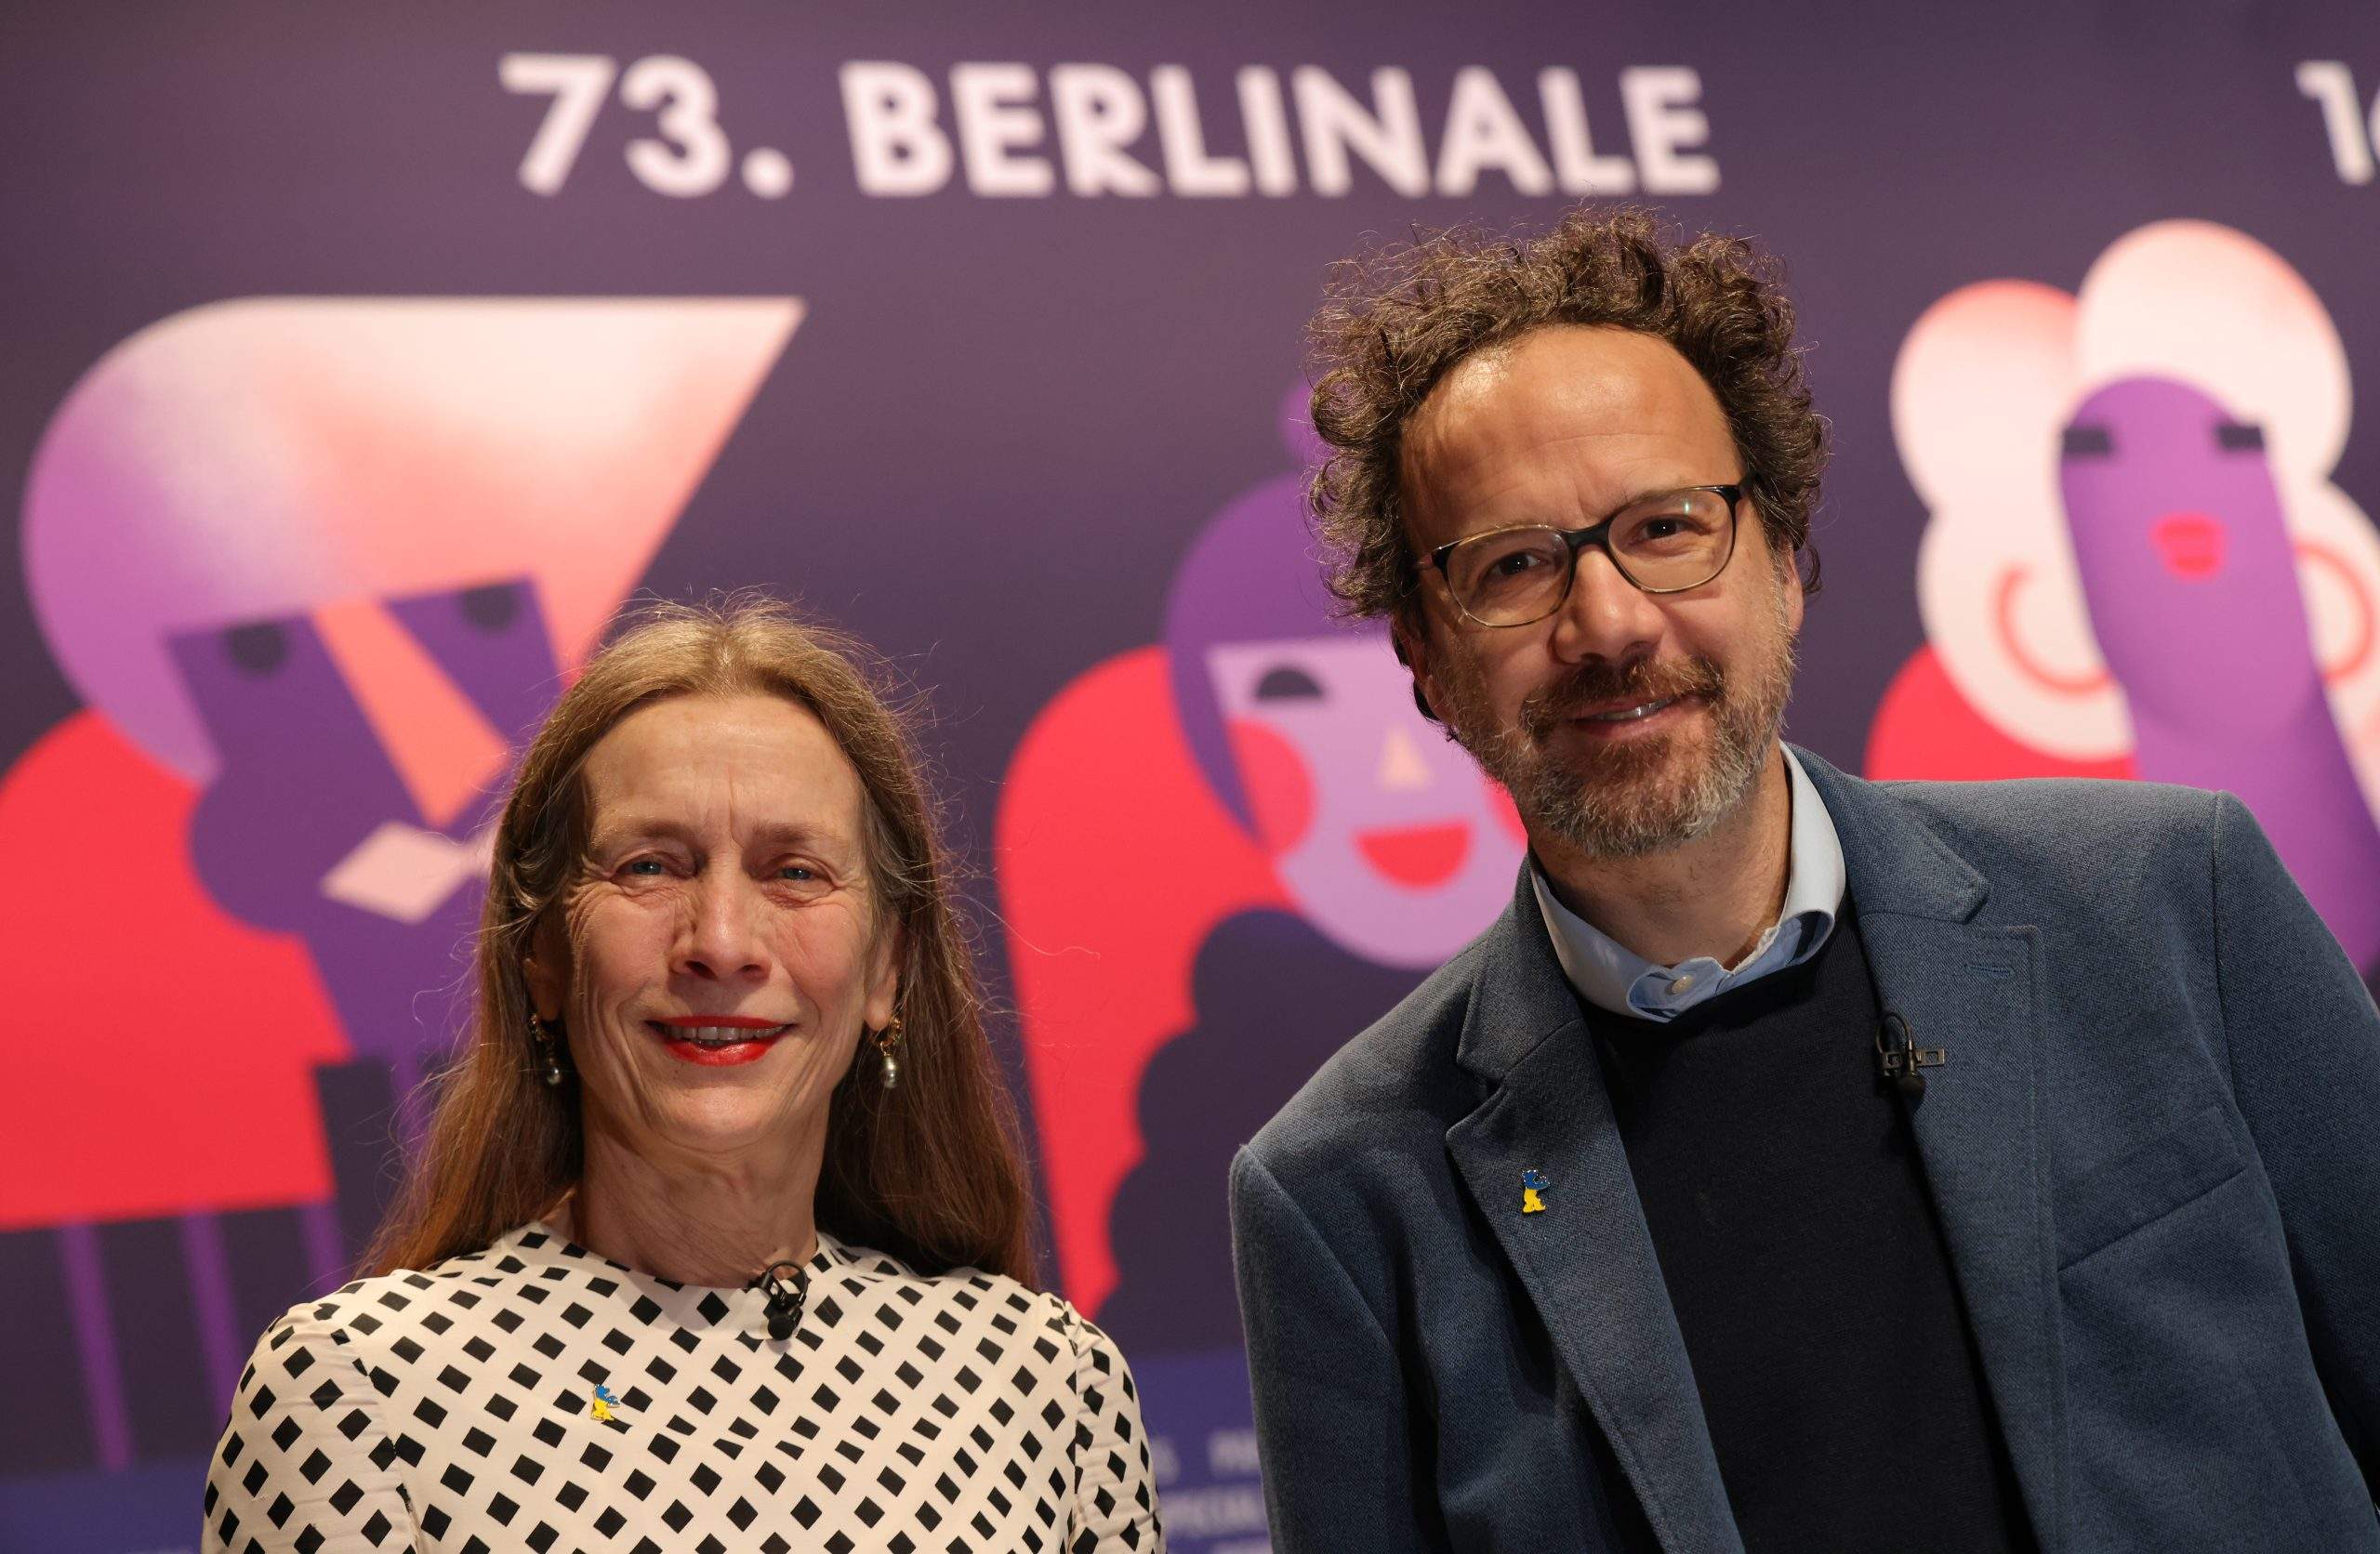 Berlinale chatrian scaled 4